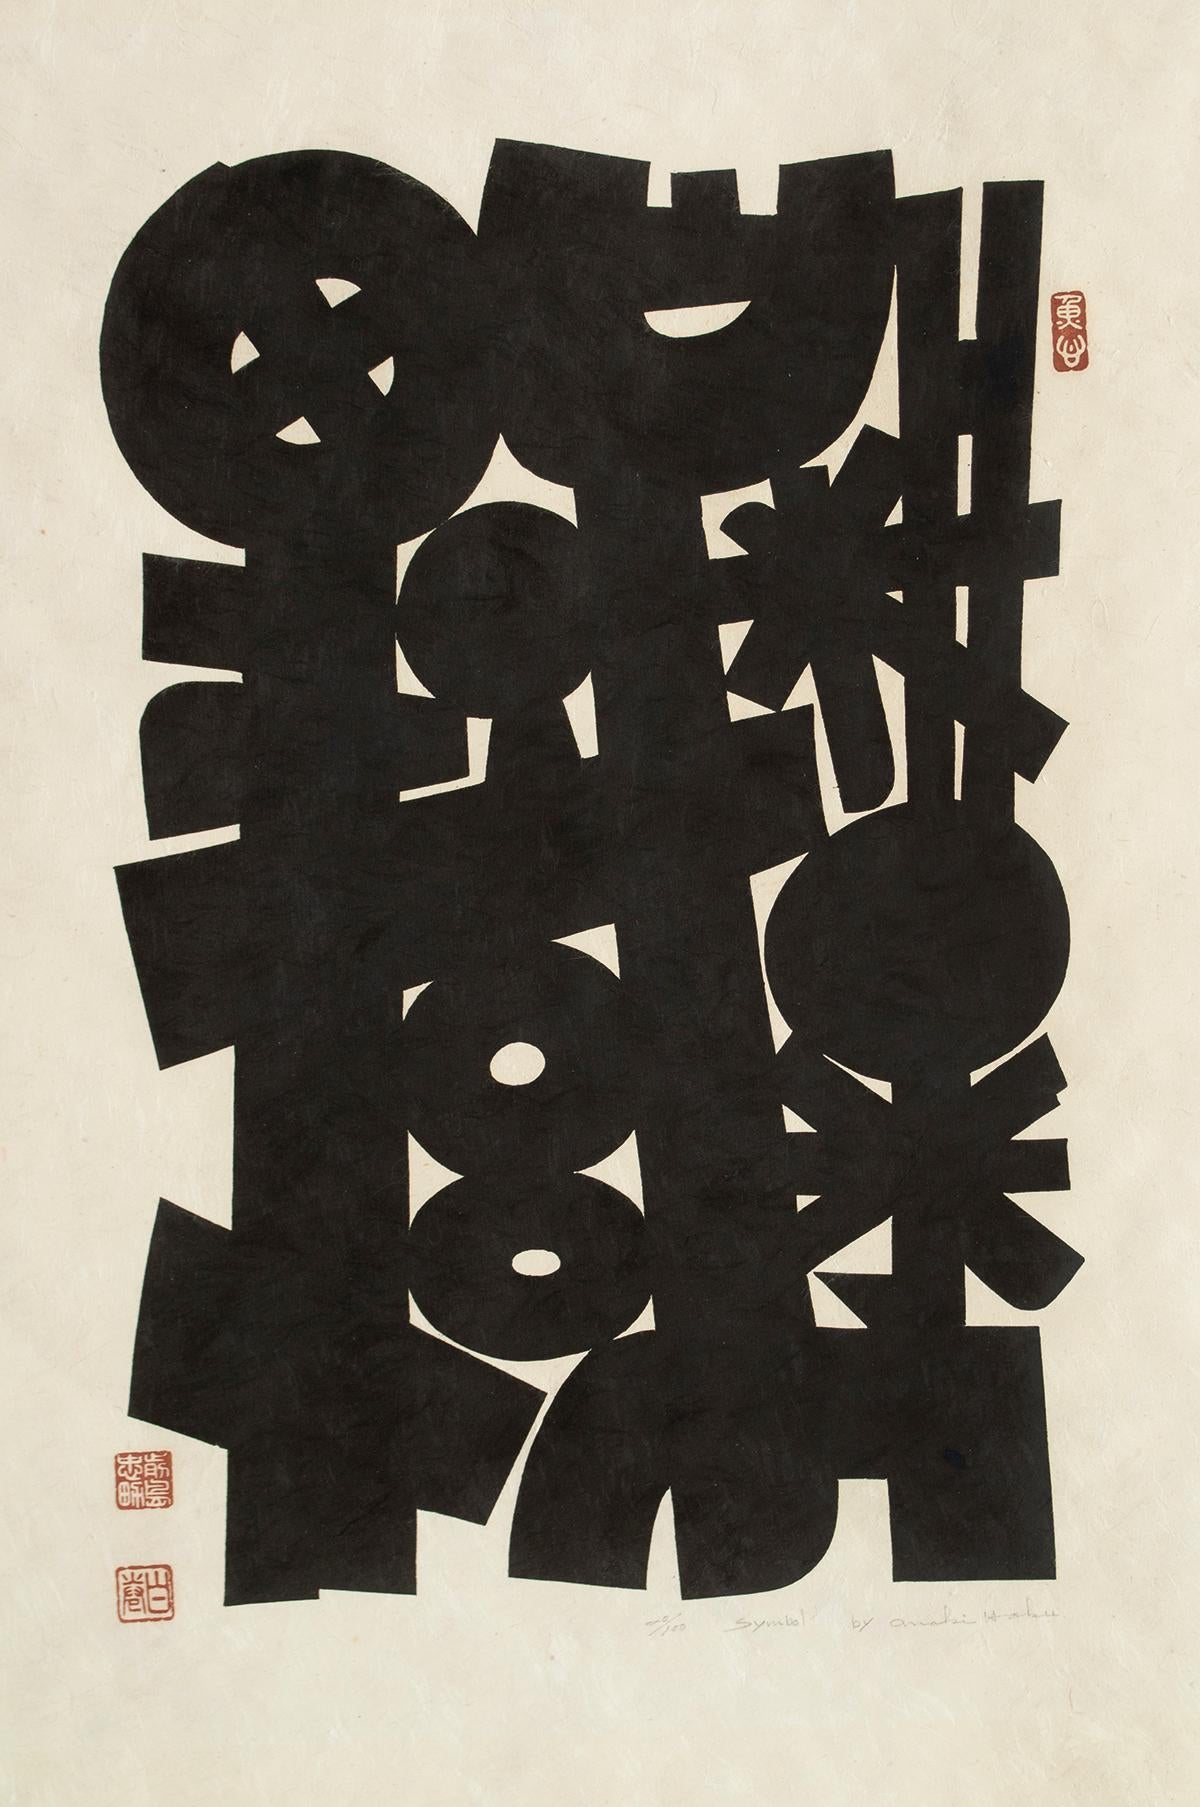 1961 graphic black and white Haku Maki Woodblock print, Japan

Haku Maki (1924-2000)
Symbol, 1961
Japanese mulberry paper, ink
Sheet: 23.75 x 18 in. (60.3 x 45.7 cm)
Edition: 20/100

A very strong, large calligraphic woodblock print by the